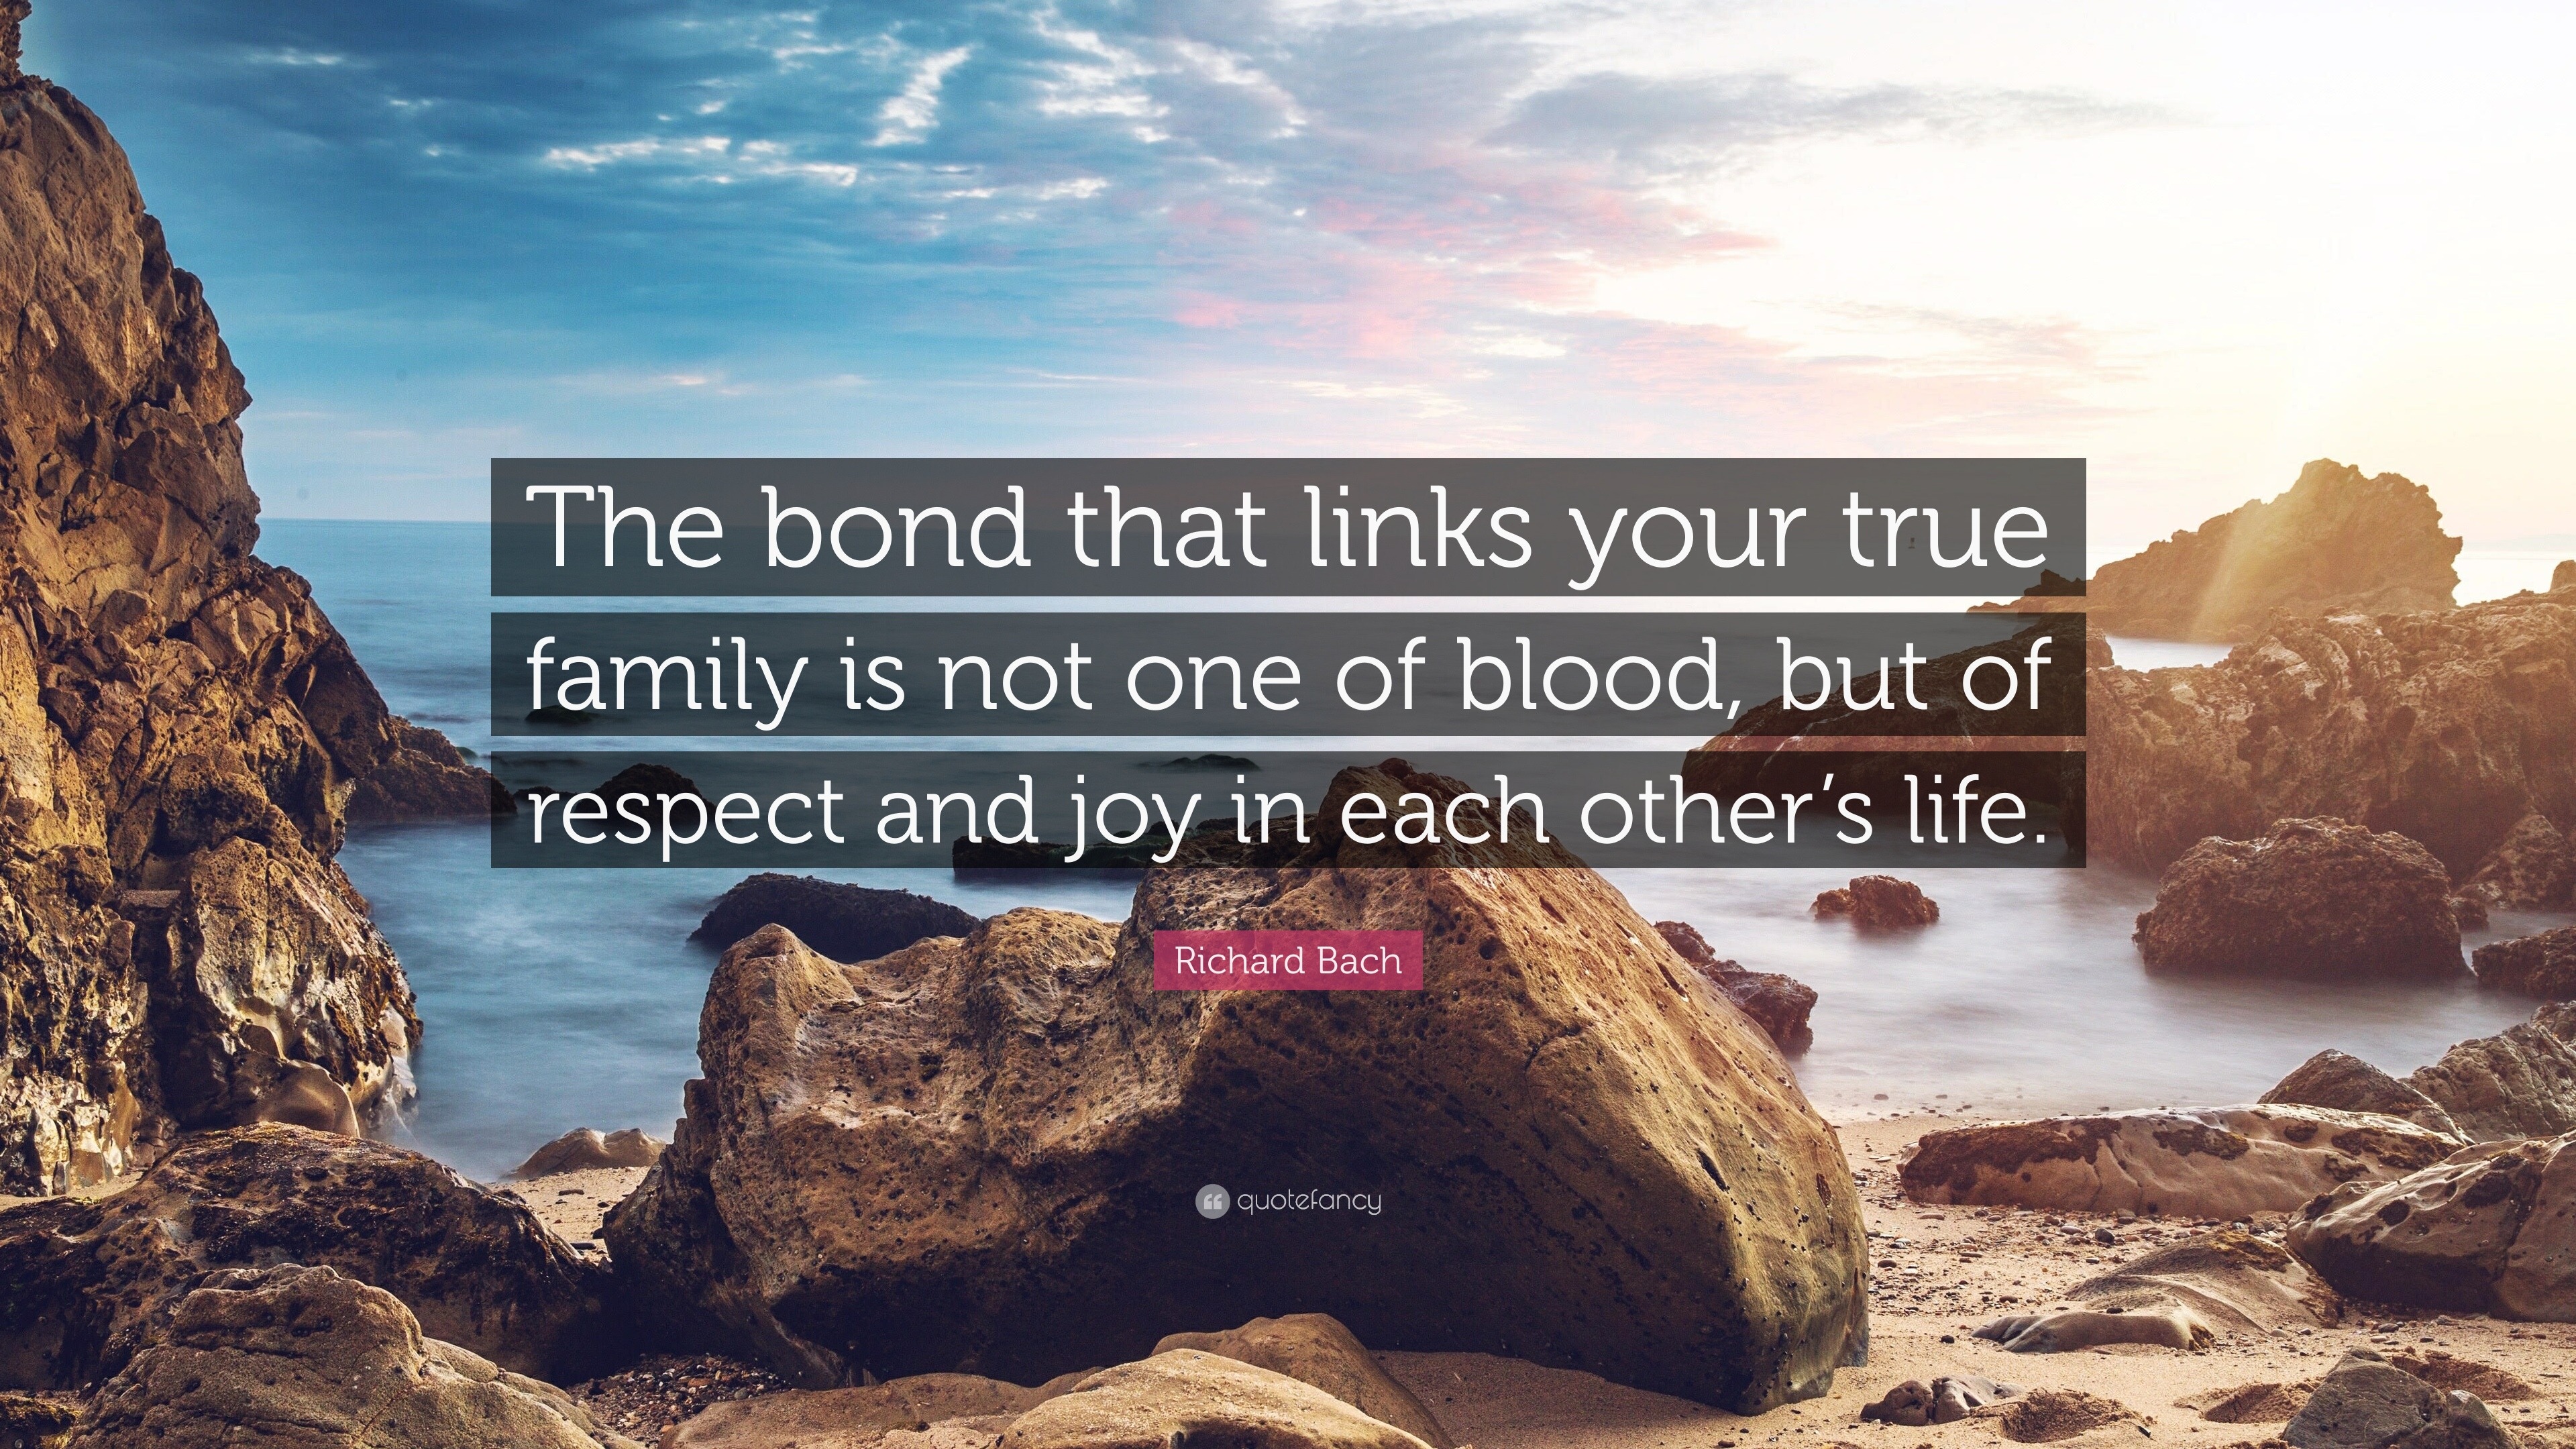 Richard Bach Quote “The bond that links your true family is not one of